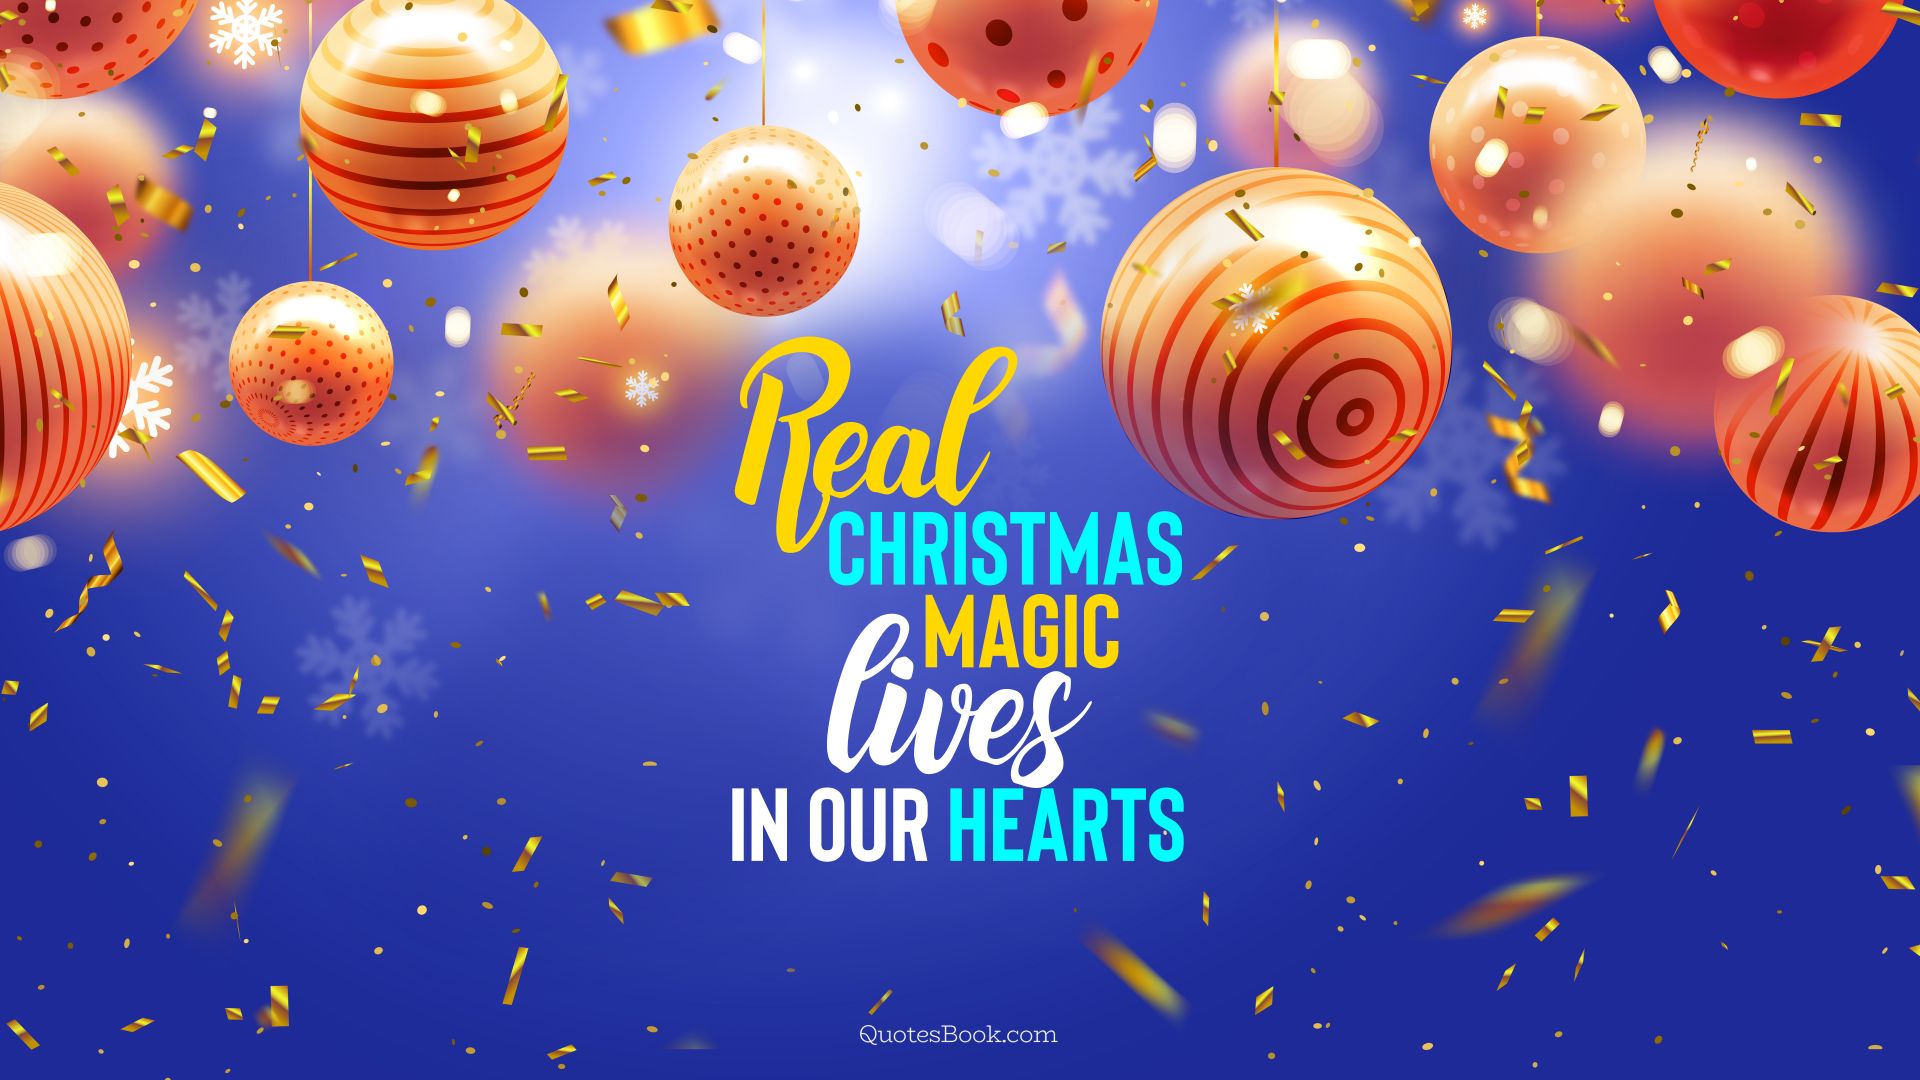 Real Christmas magic lives in our hearts. - Quote by QuotesBook